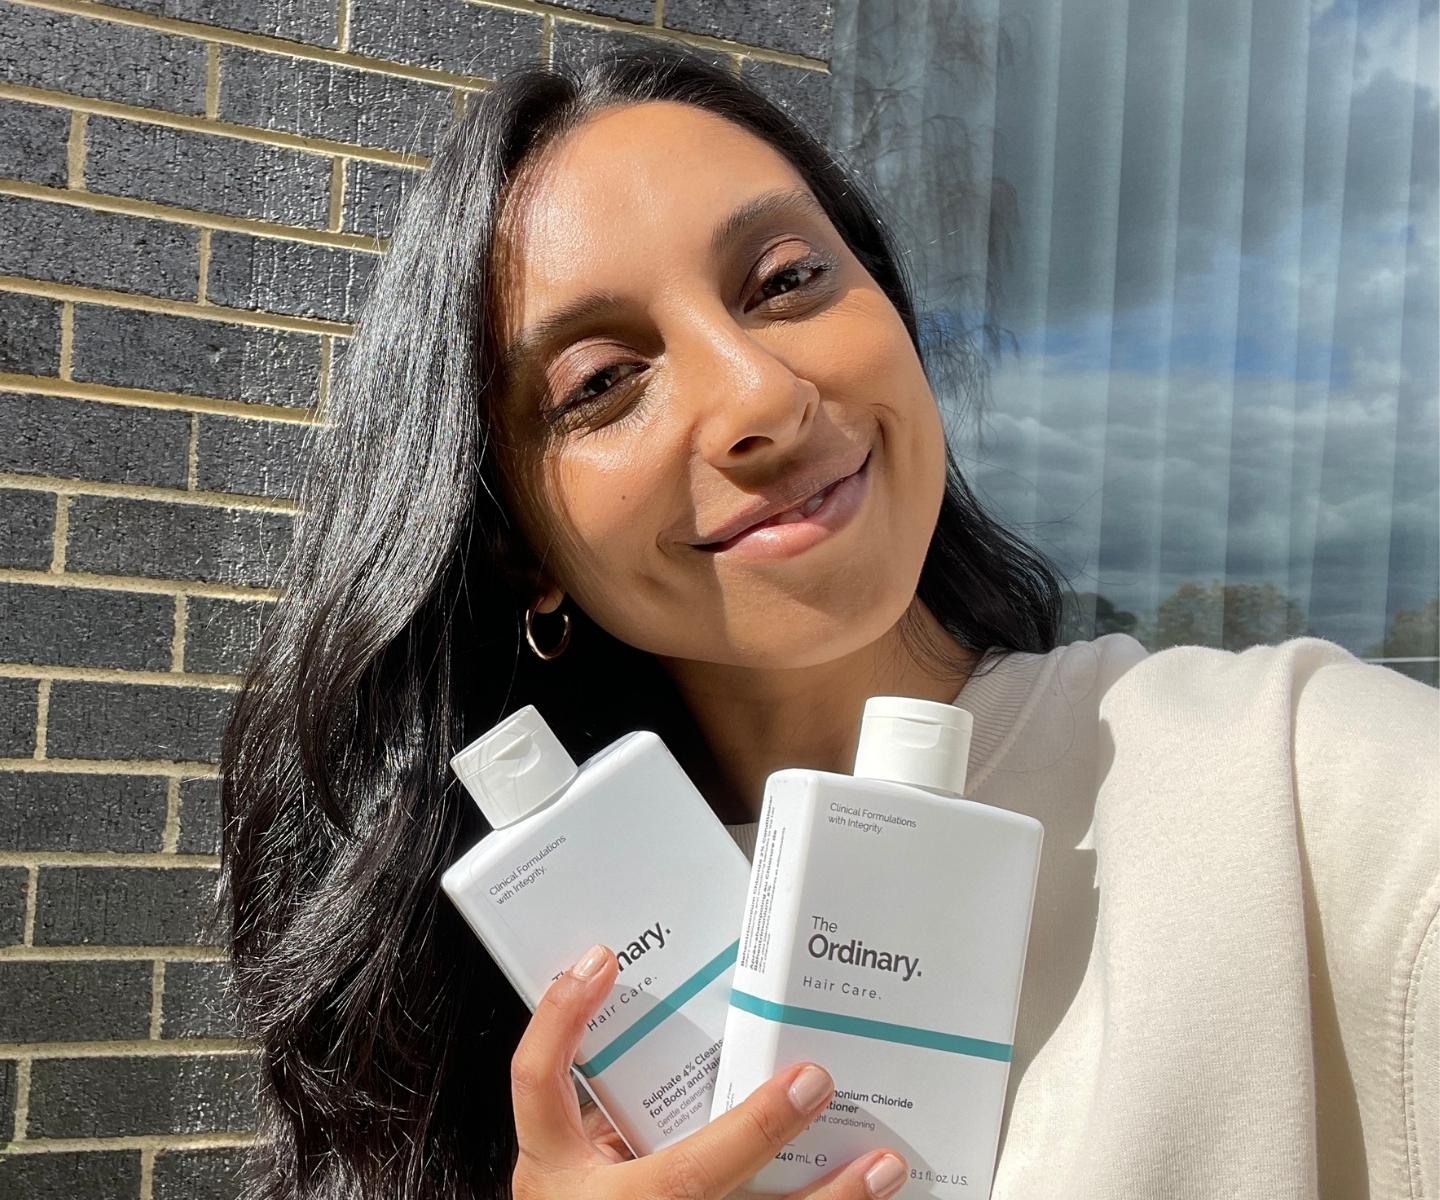 The Ordinary's New Hair Products Are Finally Here, But Are They as Good as  the Skin Care?